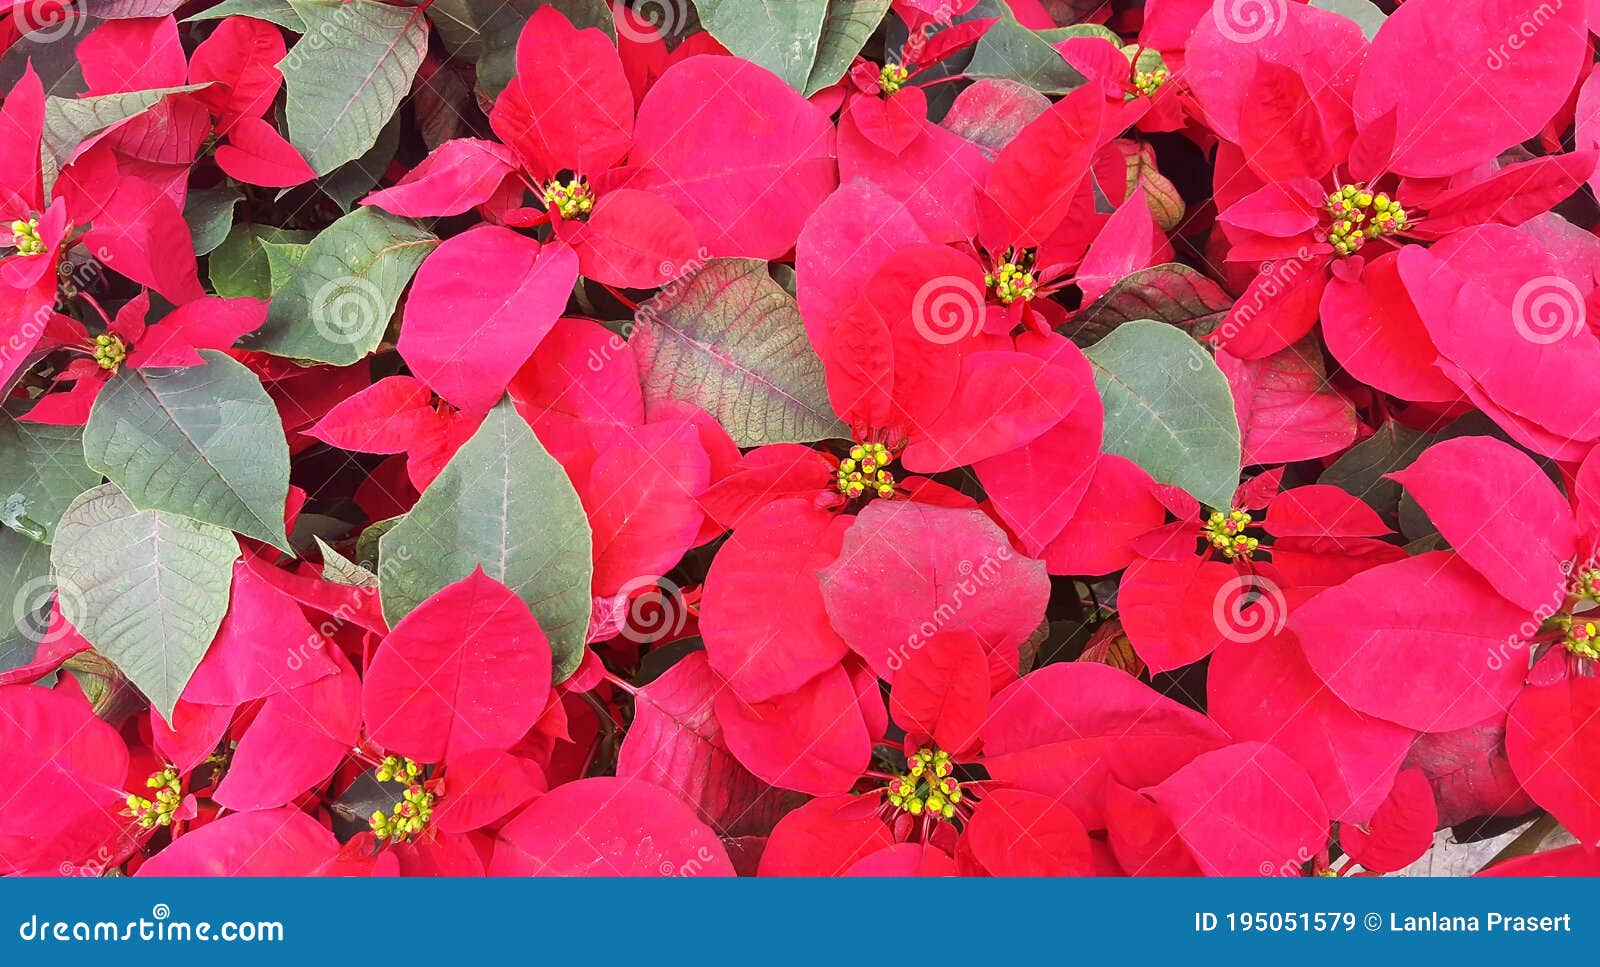 Beautiful Red Christmas Flower Poinsettia Stock Image Image Of